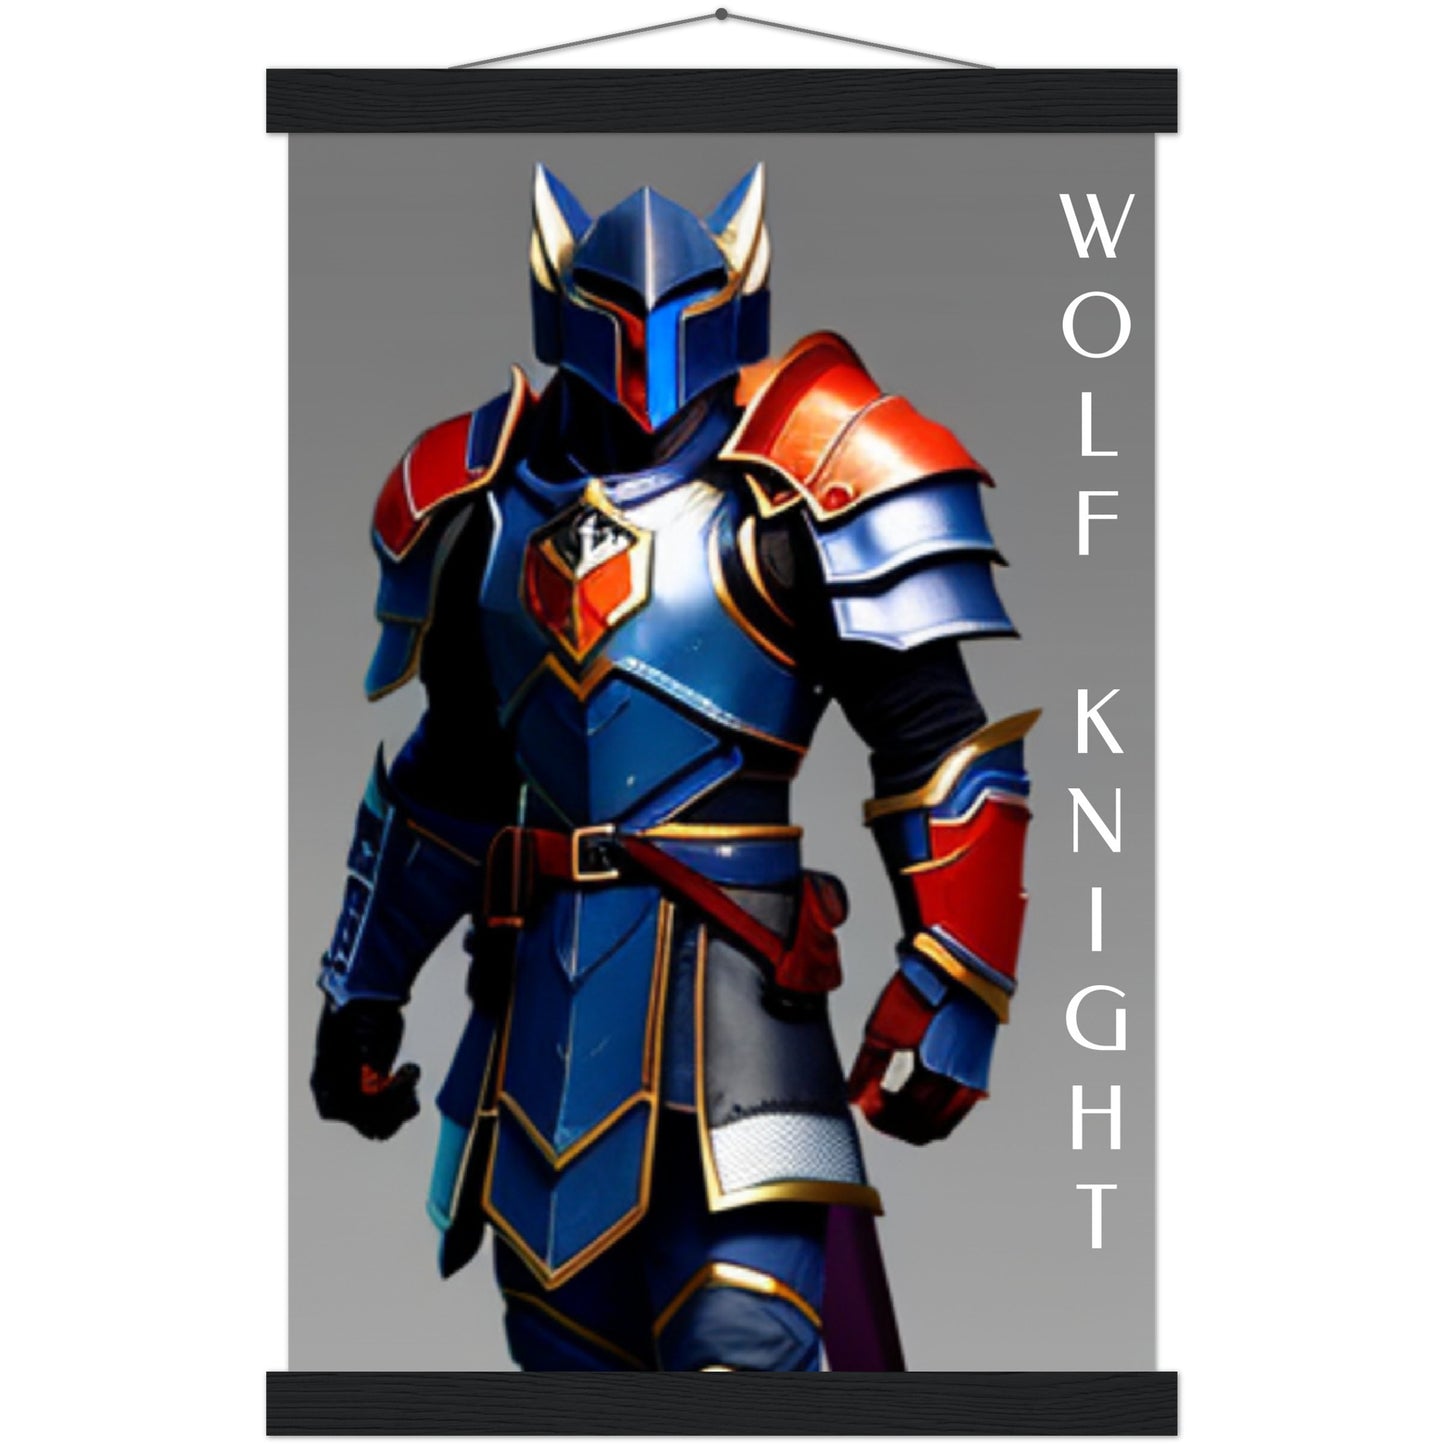 Wolf Knight - Classic Semi-Glossy Paper Poster with Hanger